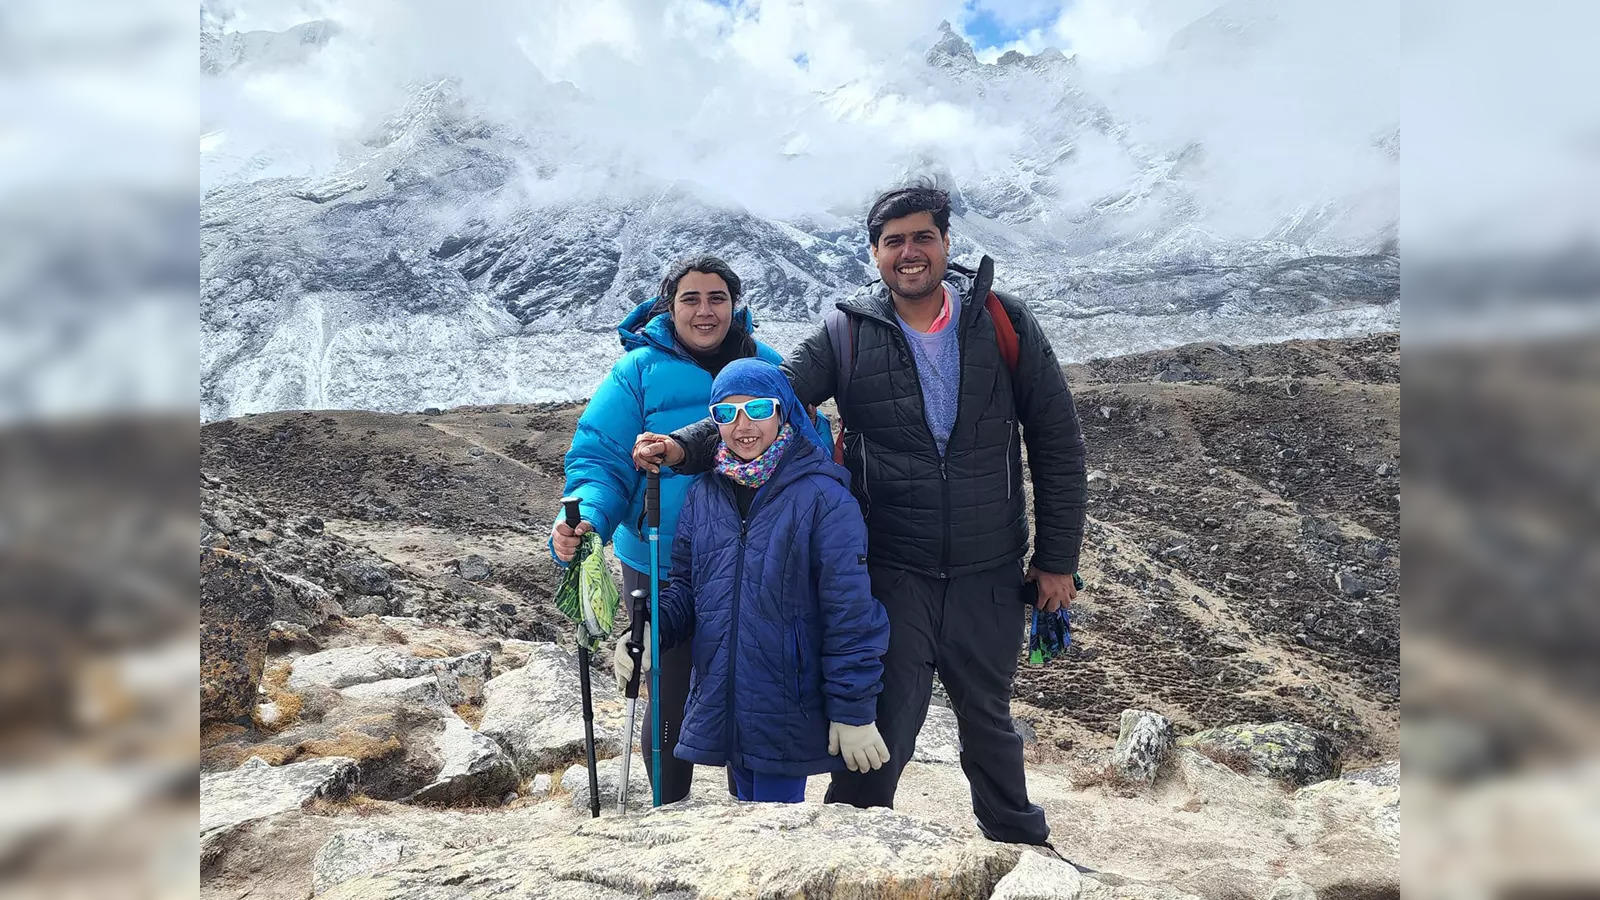 mount everest: On top of the world! This 10-year-old braves